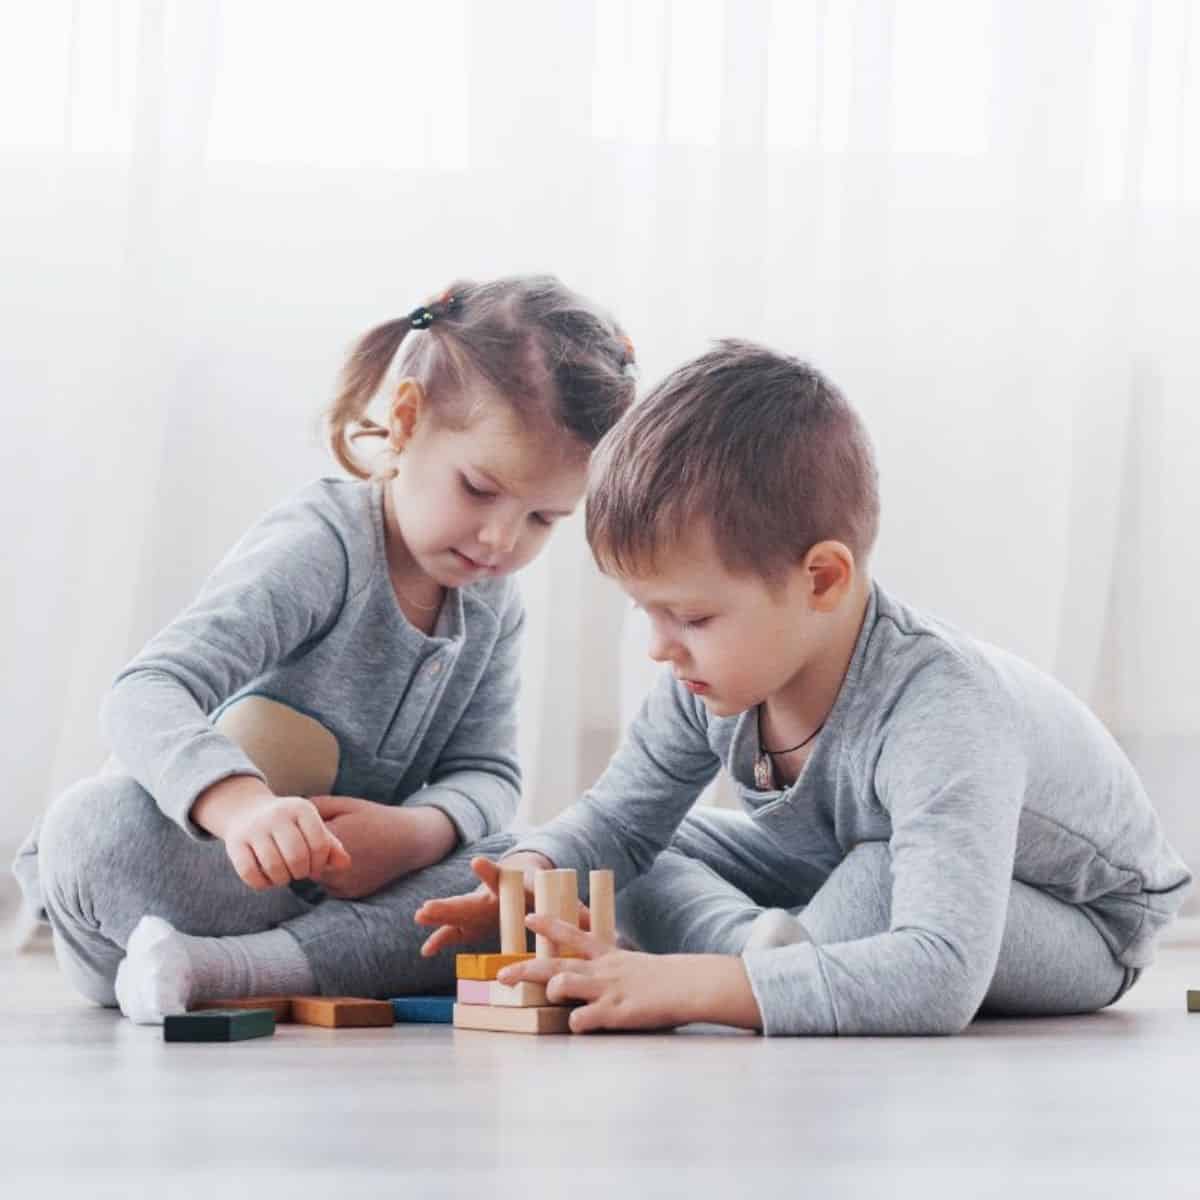 Two young kids playing together on the floor.